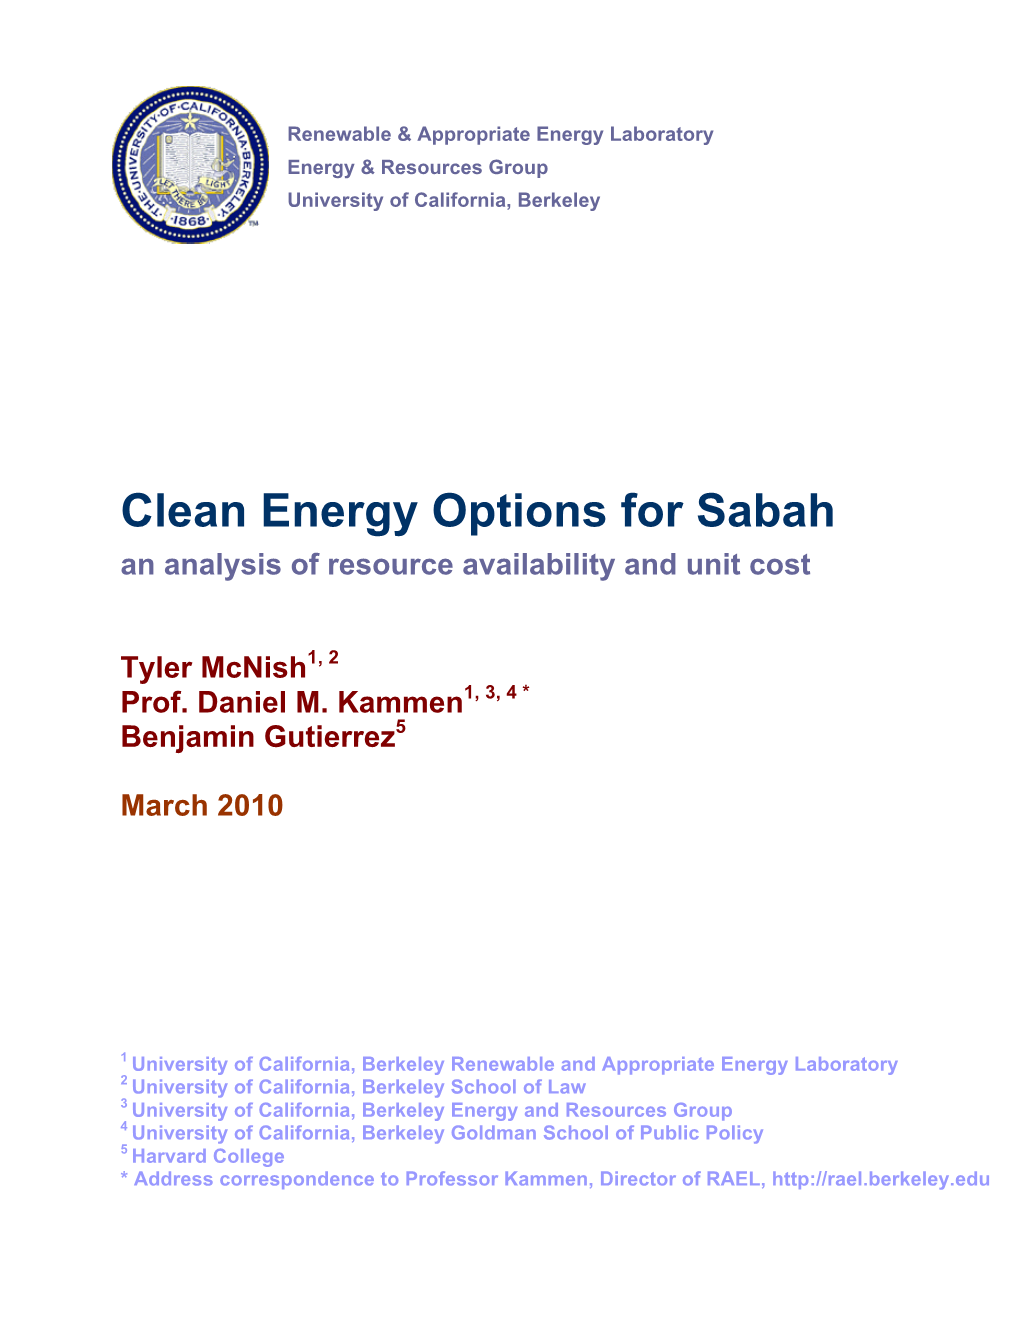 Clean Energy Options for Sabah an Analysis of Resource Availability and Unit Cost